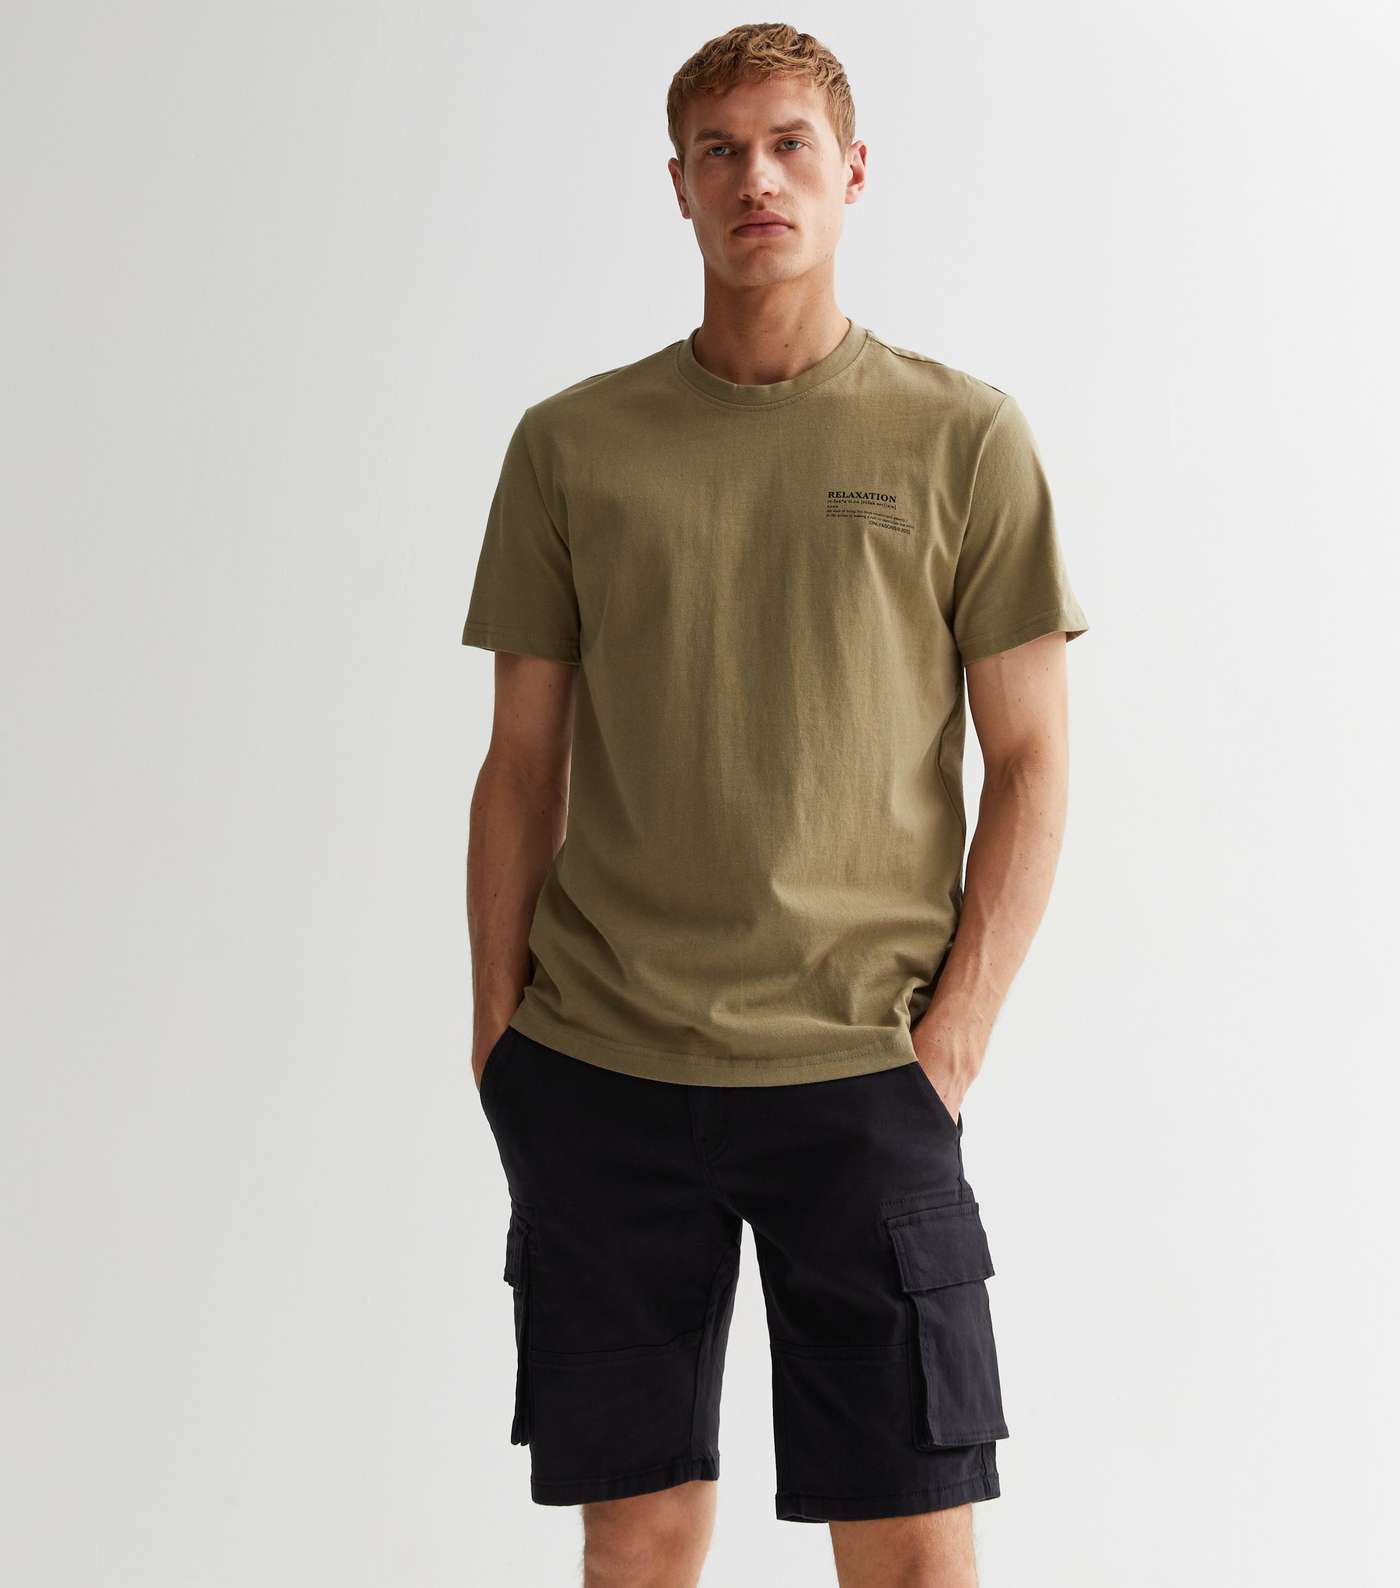 Only & Sons Black Cargo Shorts Image 2